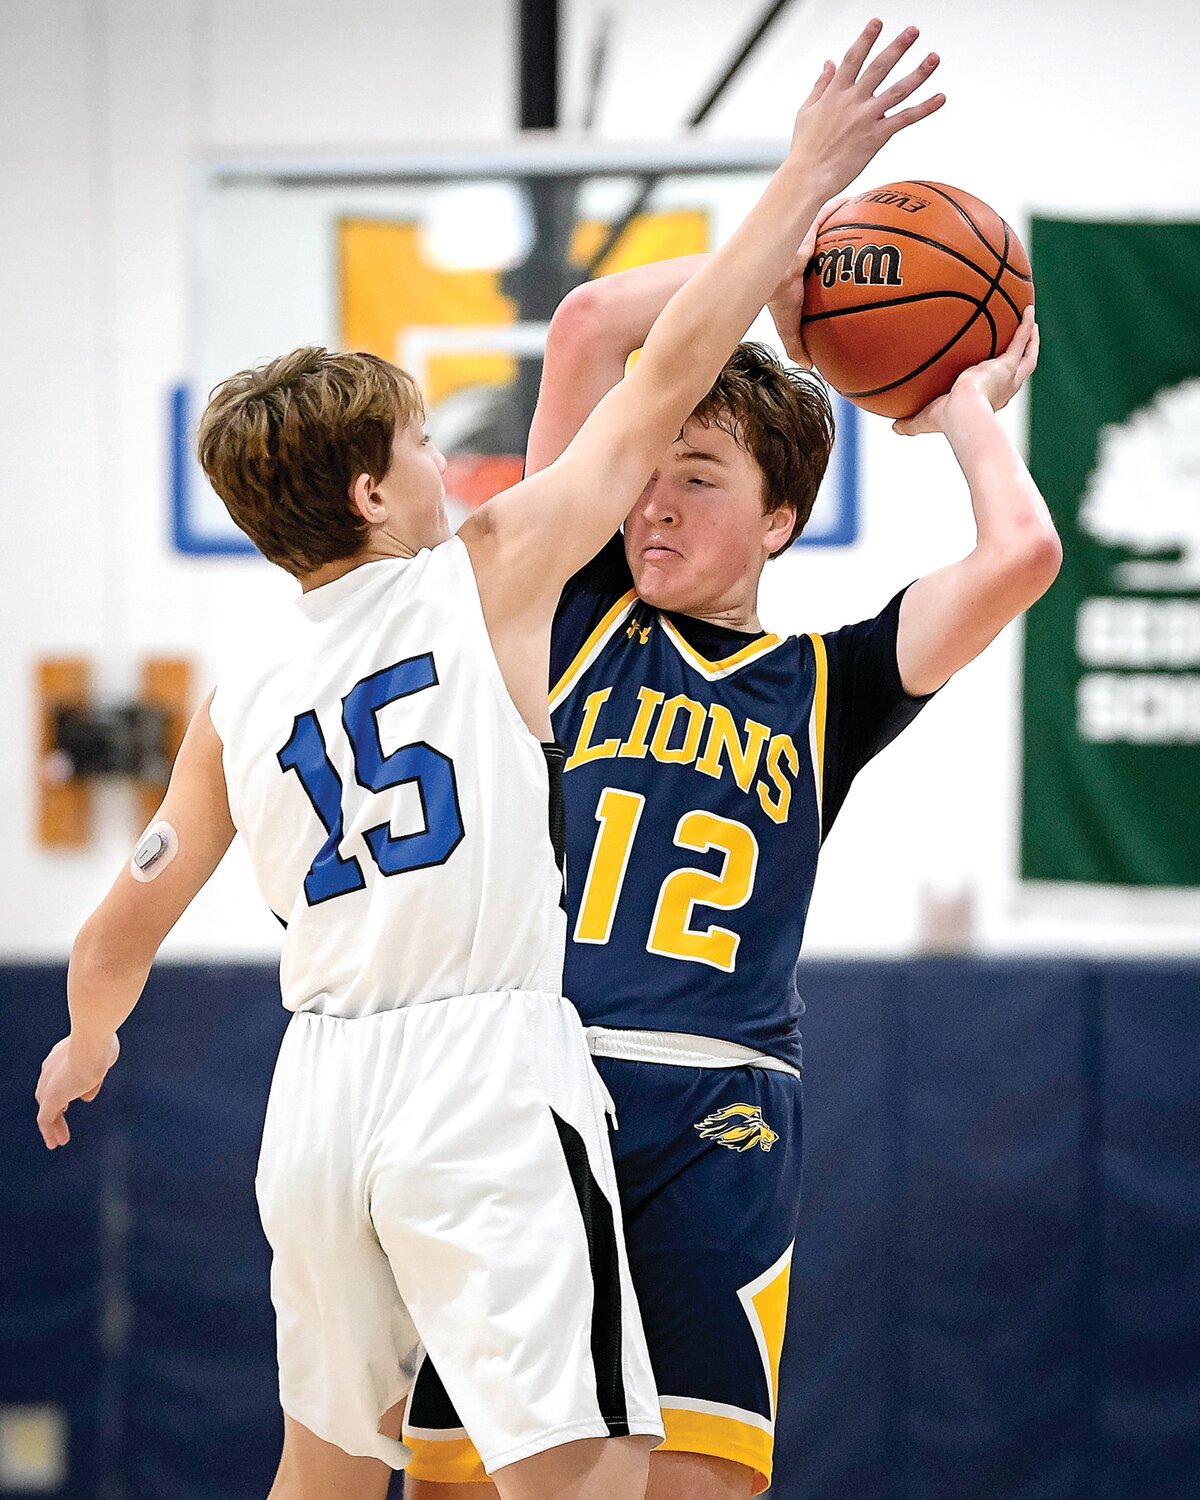 New Hope-Solebury’s John Nettles takes an elbow to the head while trying to make a pass around Jack M. Barrack Hebrew Academy’s Lev Zilberberg.